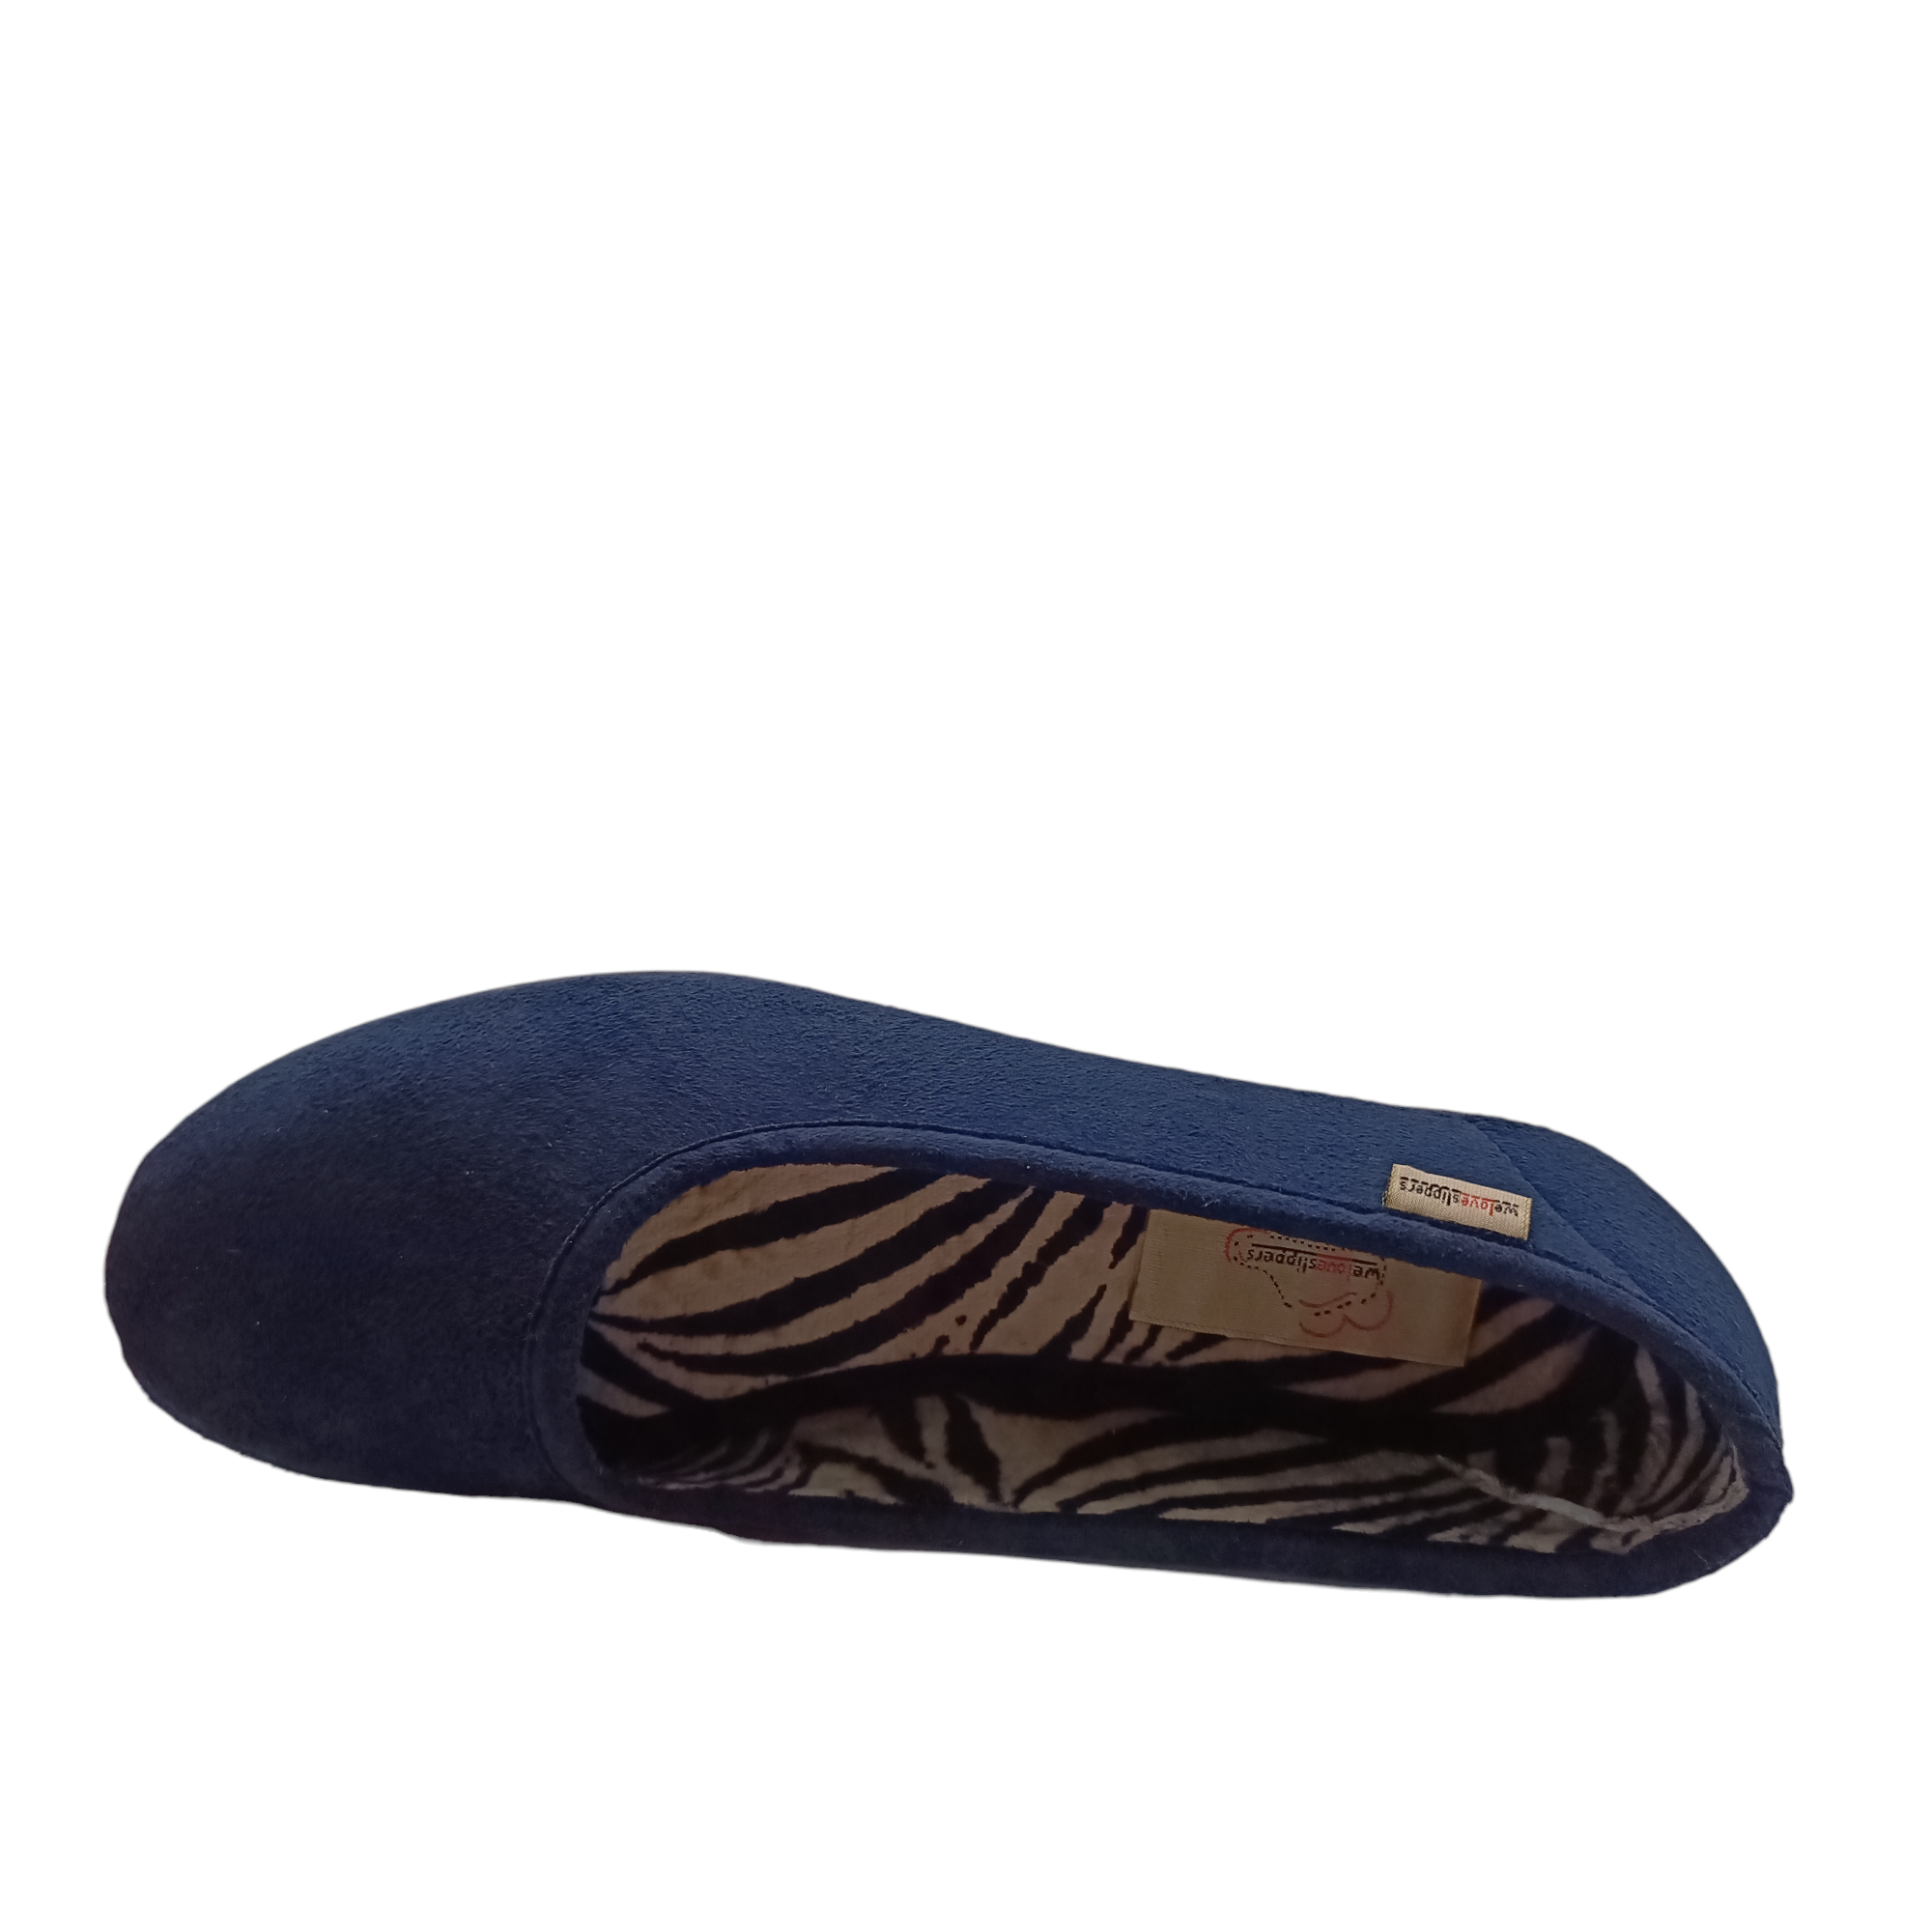 Top view of navy Nuzzle Slippers with zebra print lining. Shop Womens Slippers and Shoes Online and In-store with shoe&amp;me.